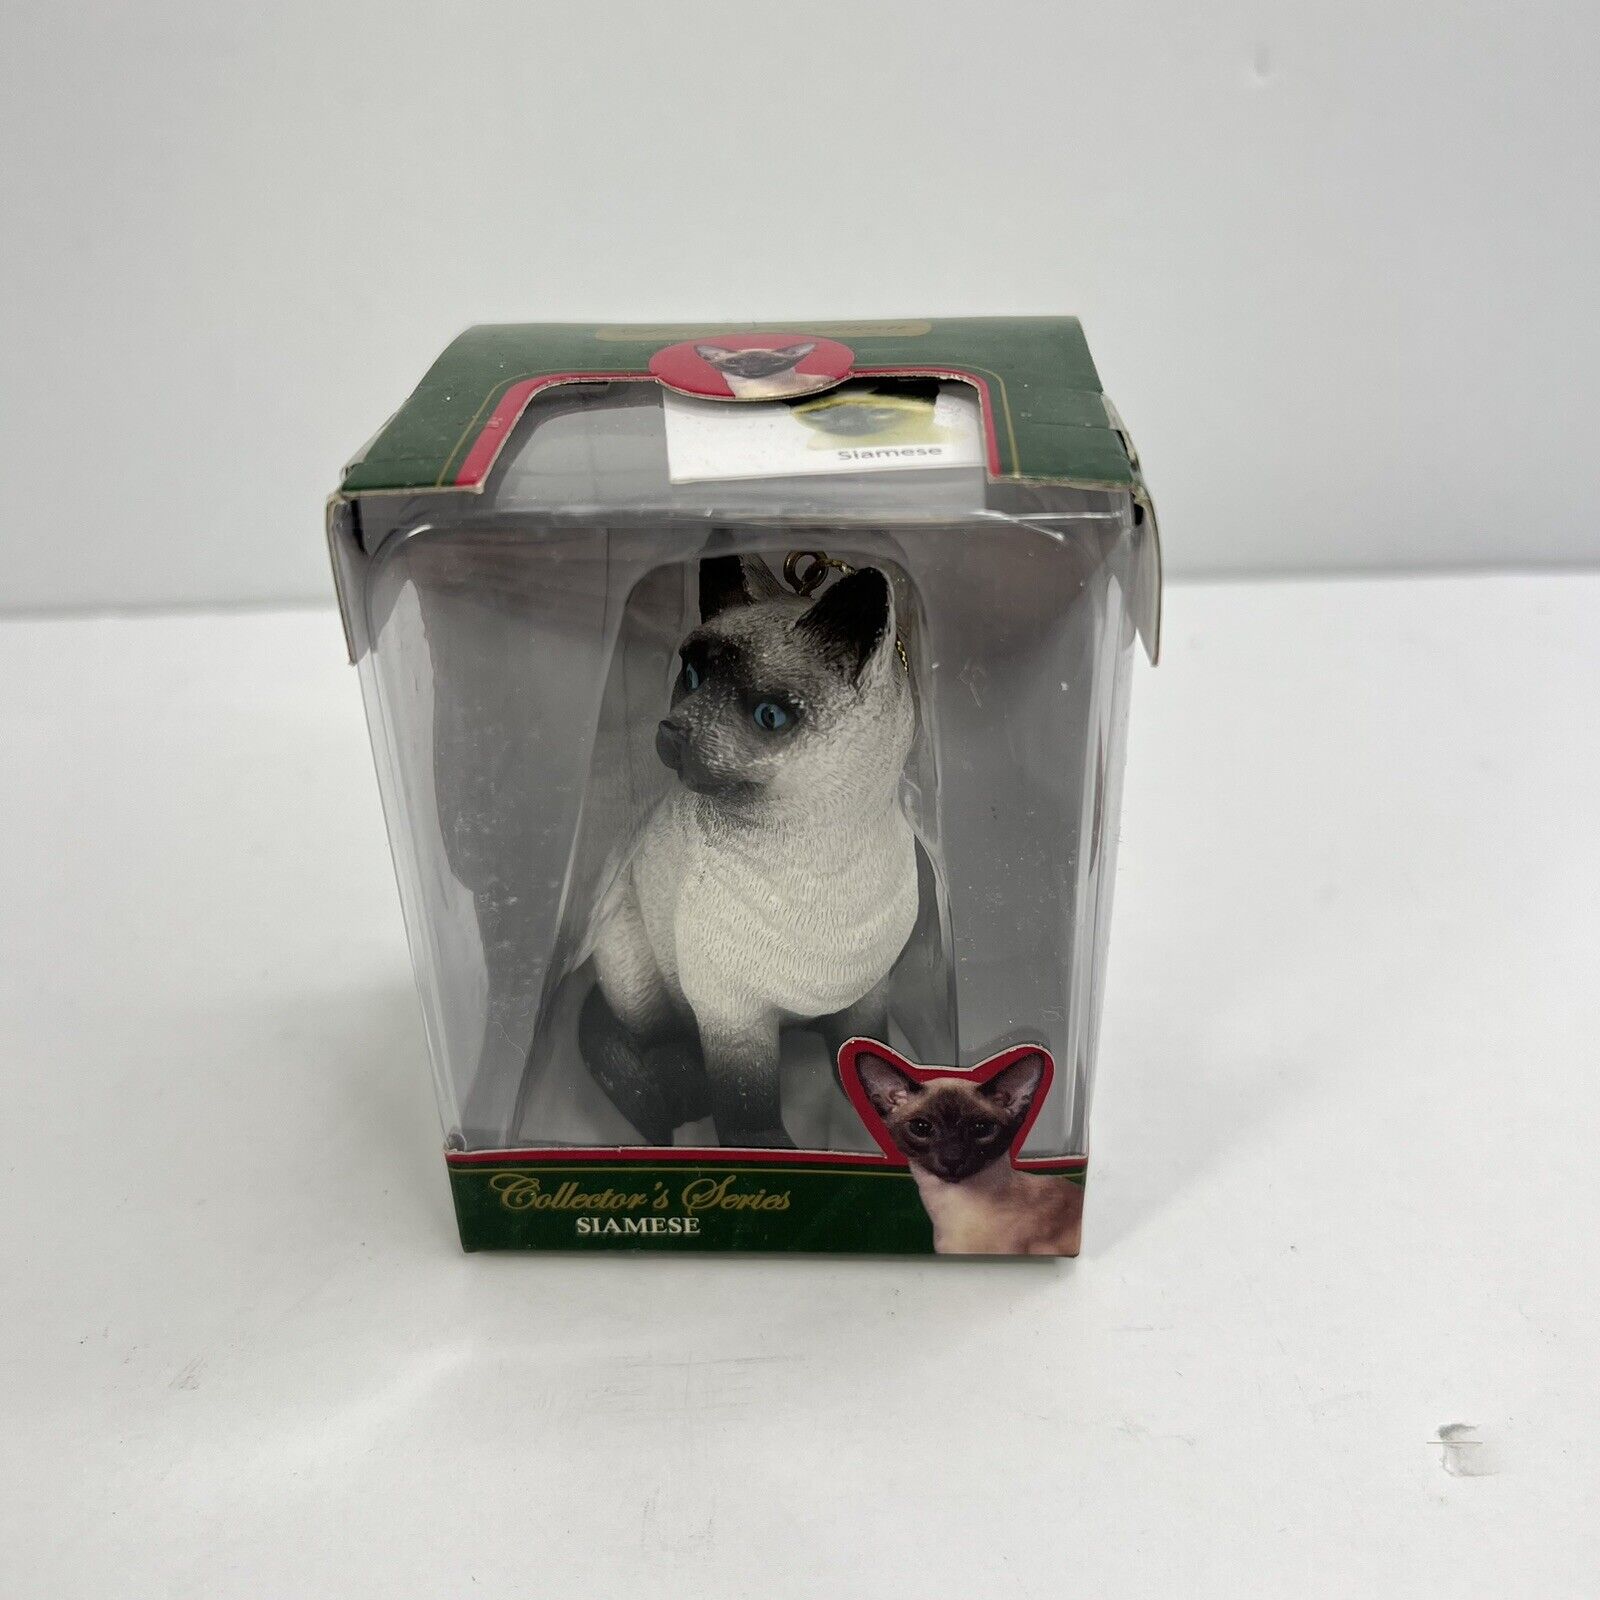 Vintage Siamese Limited Edition Collectors Series Cat Ornament 